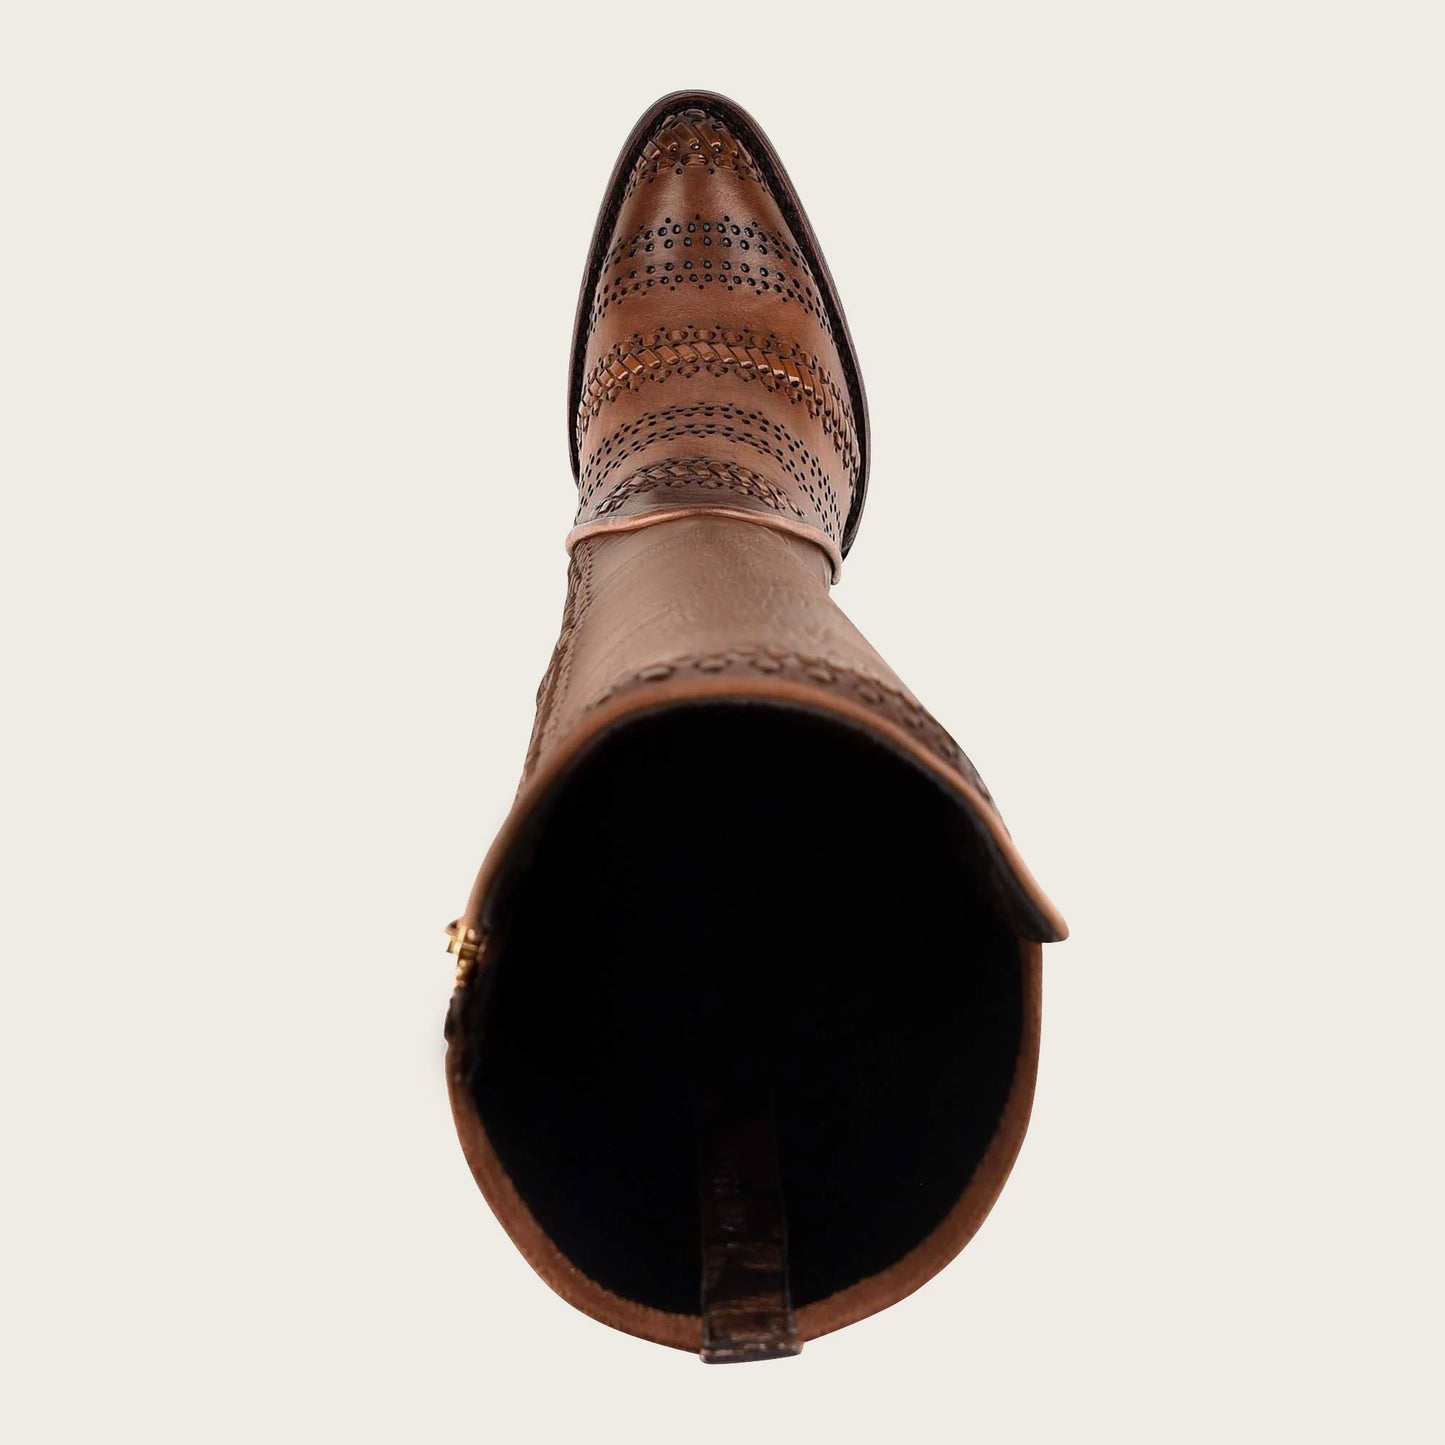 A close-up of a handwoven brown leather boot, with intricate details and sturdy craftsmanship.